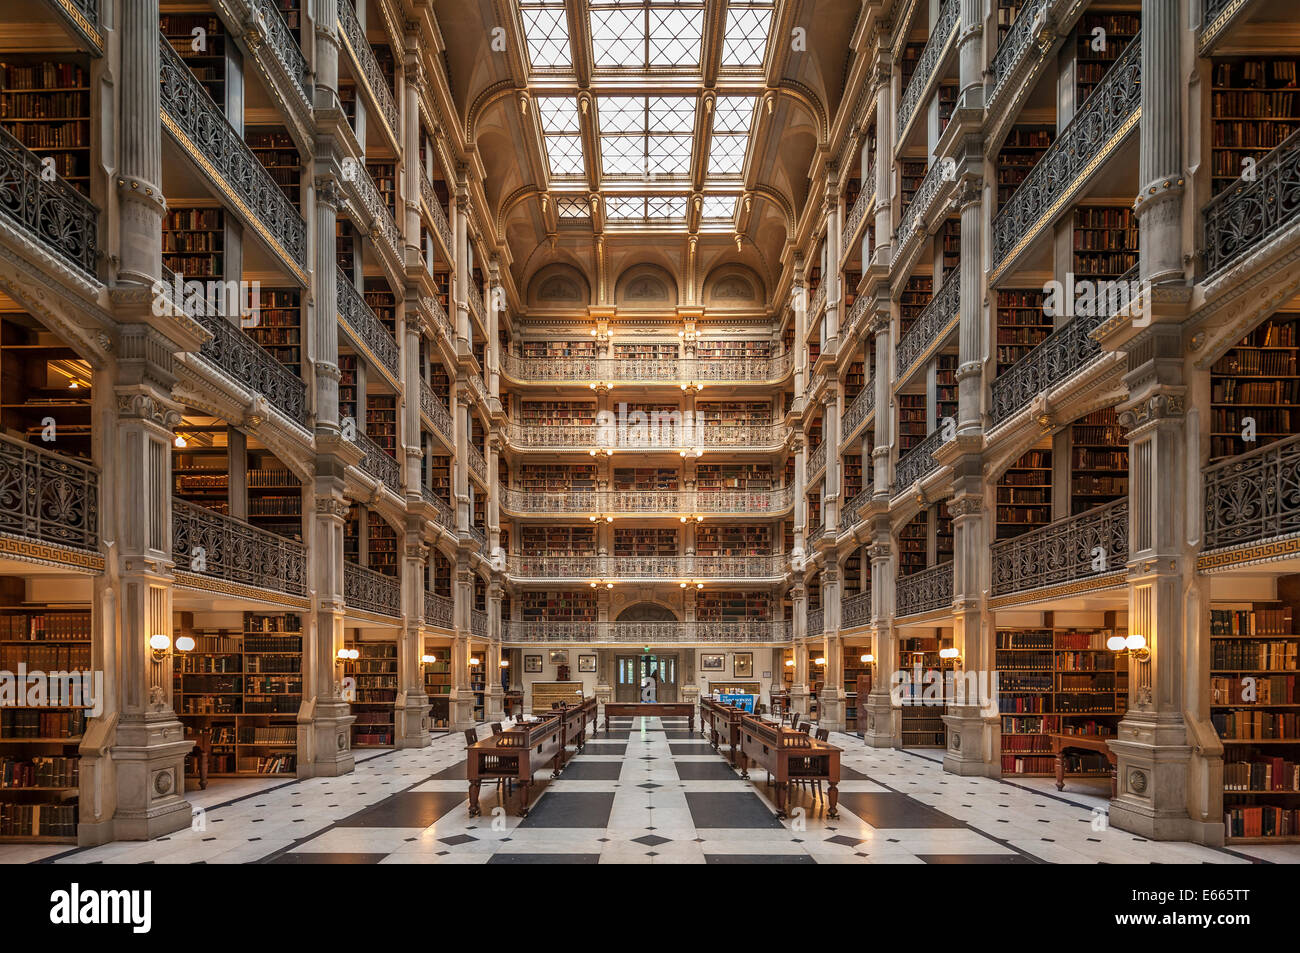 Baltimore George Peabody Library one of the most beautiful famous libraries in the world. Stock Photo